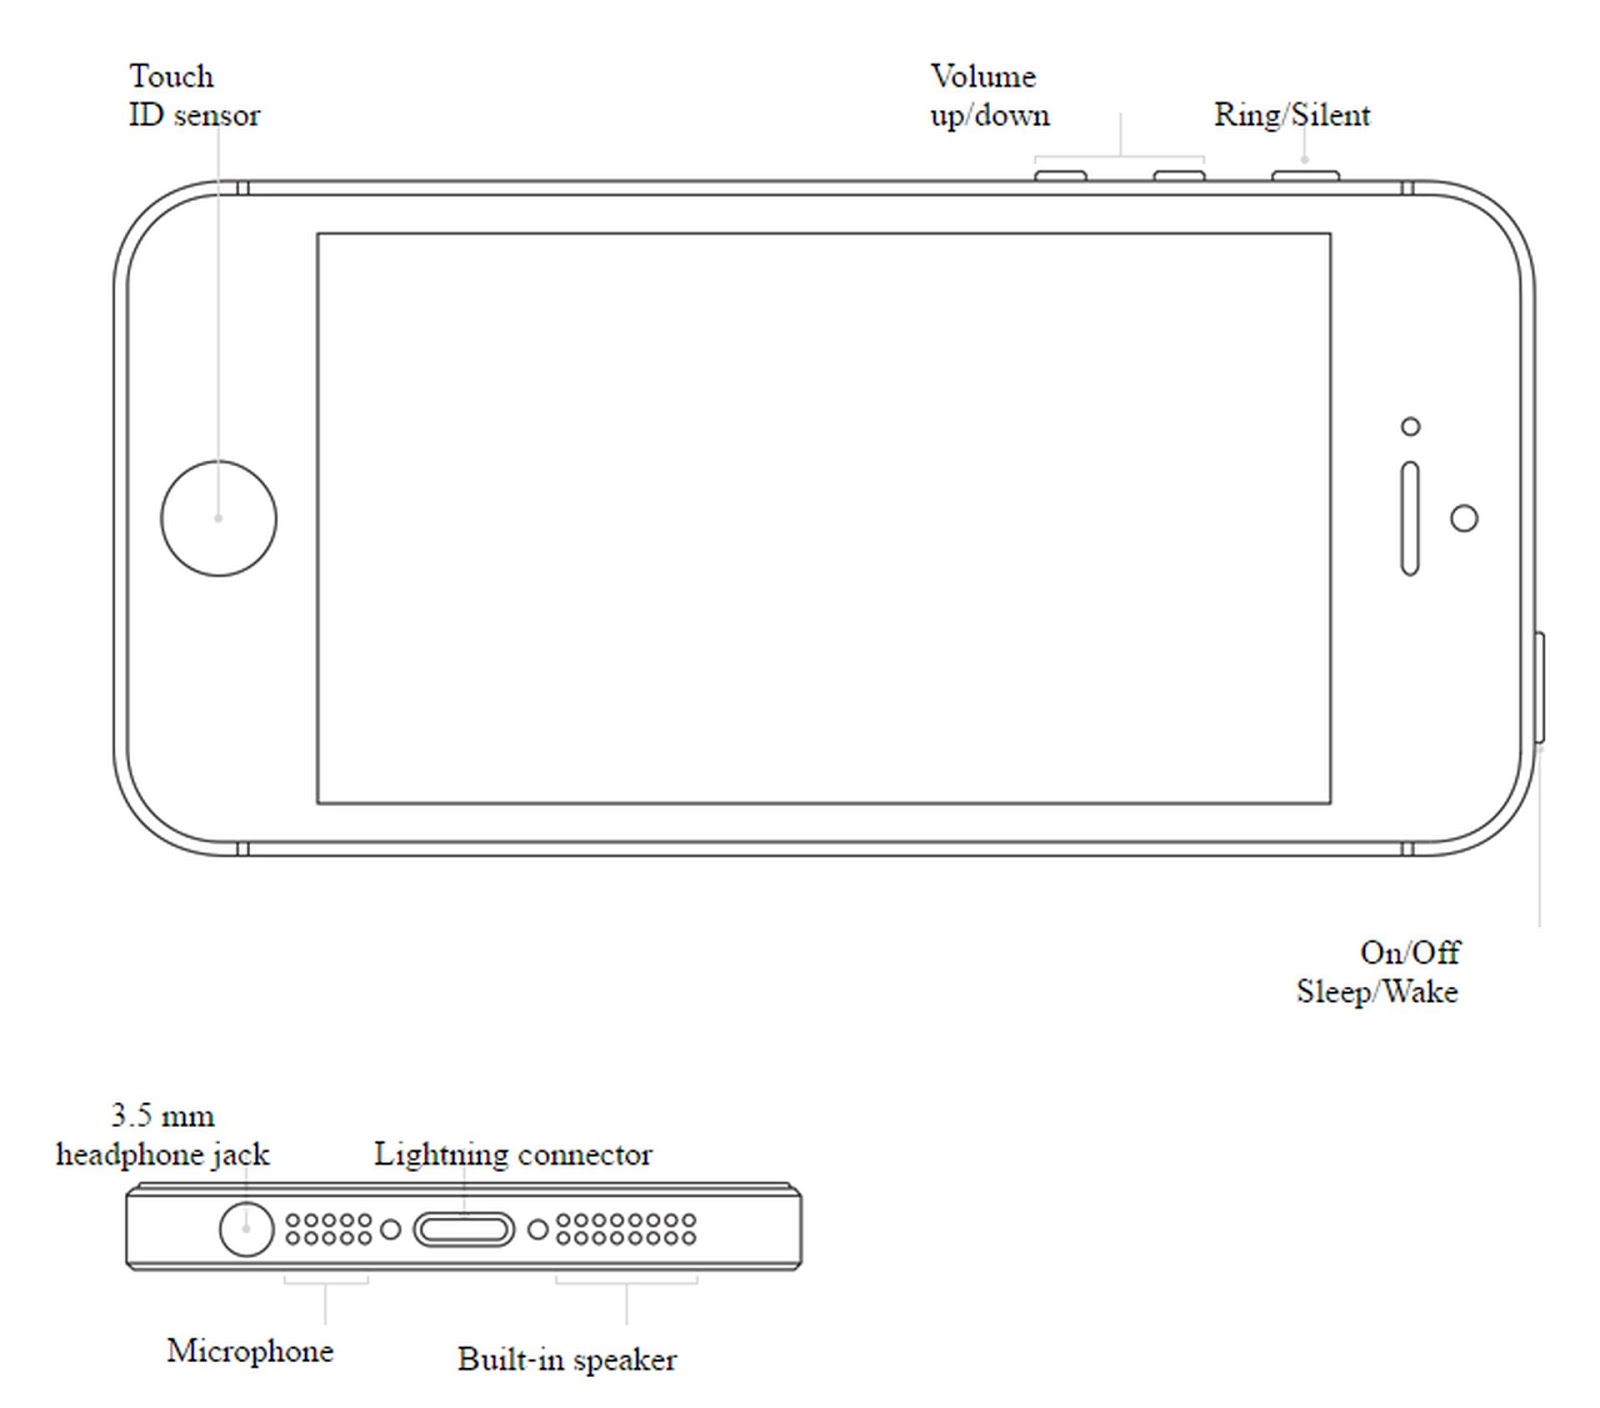 Iphone 5s instruction manual download